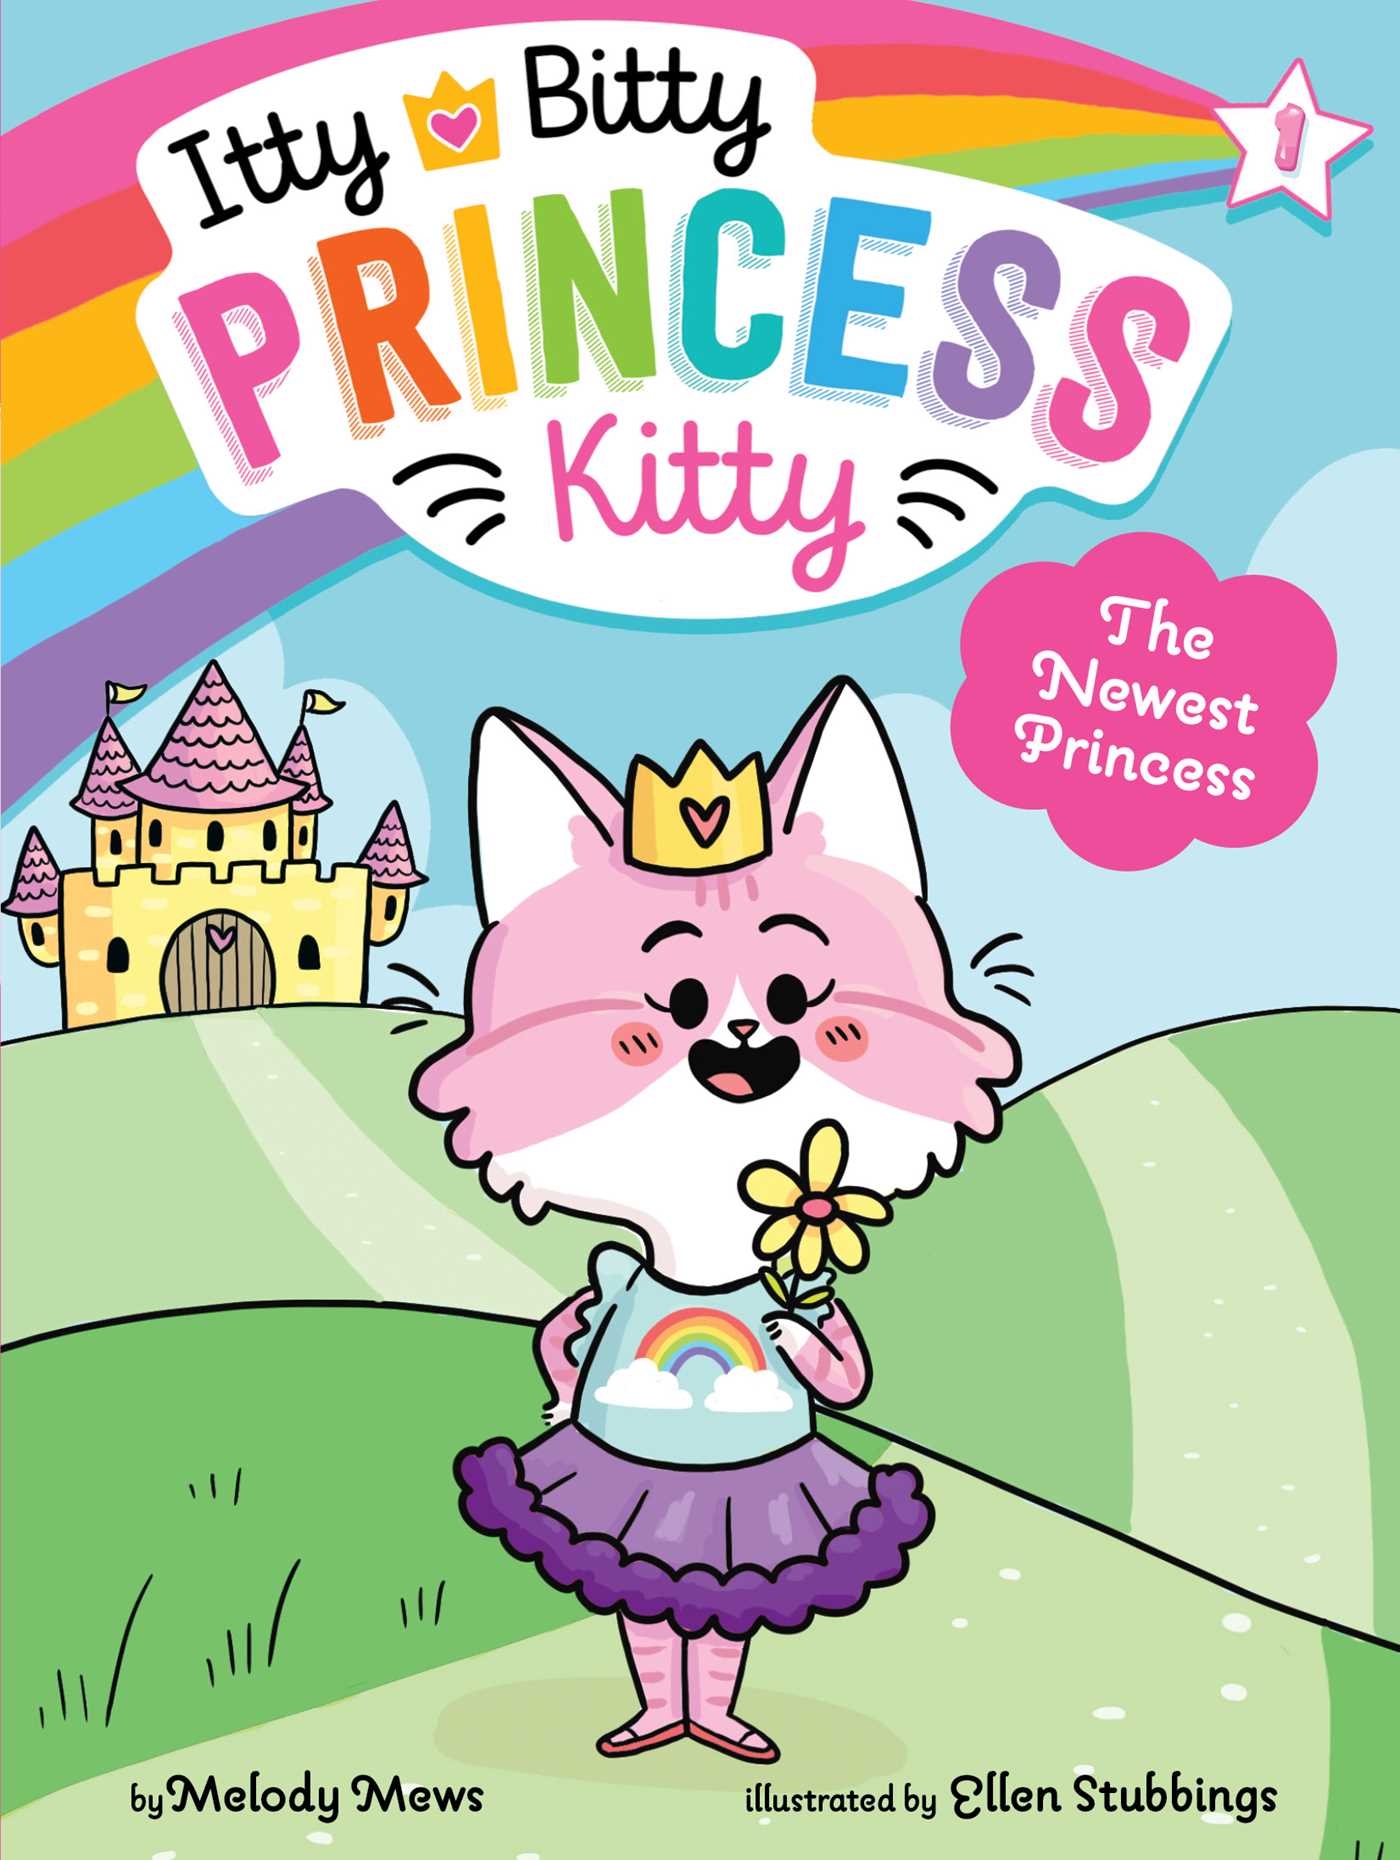 Image for "The Newest Princess"